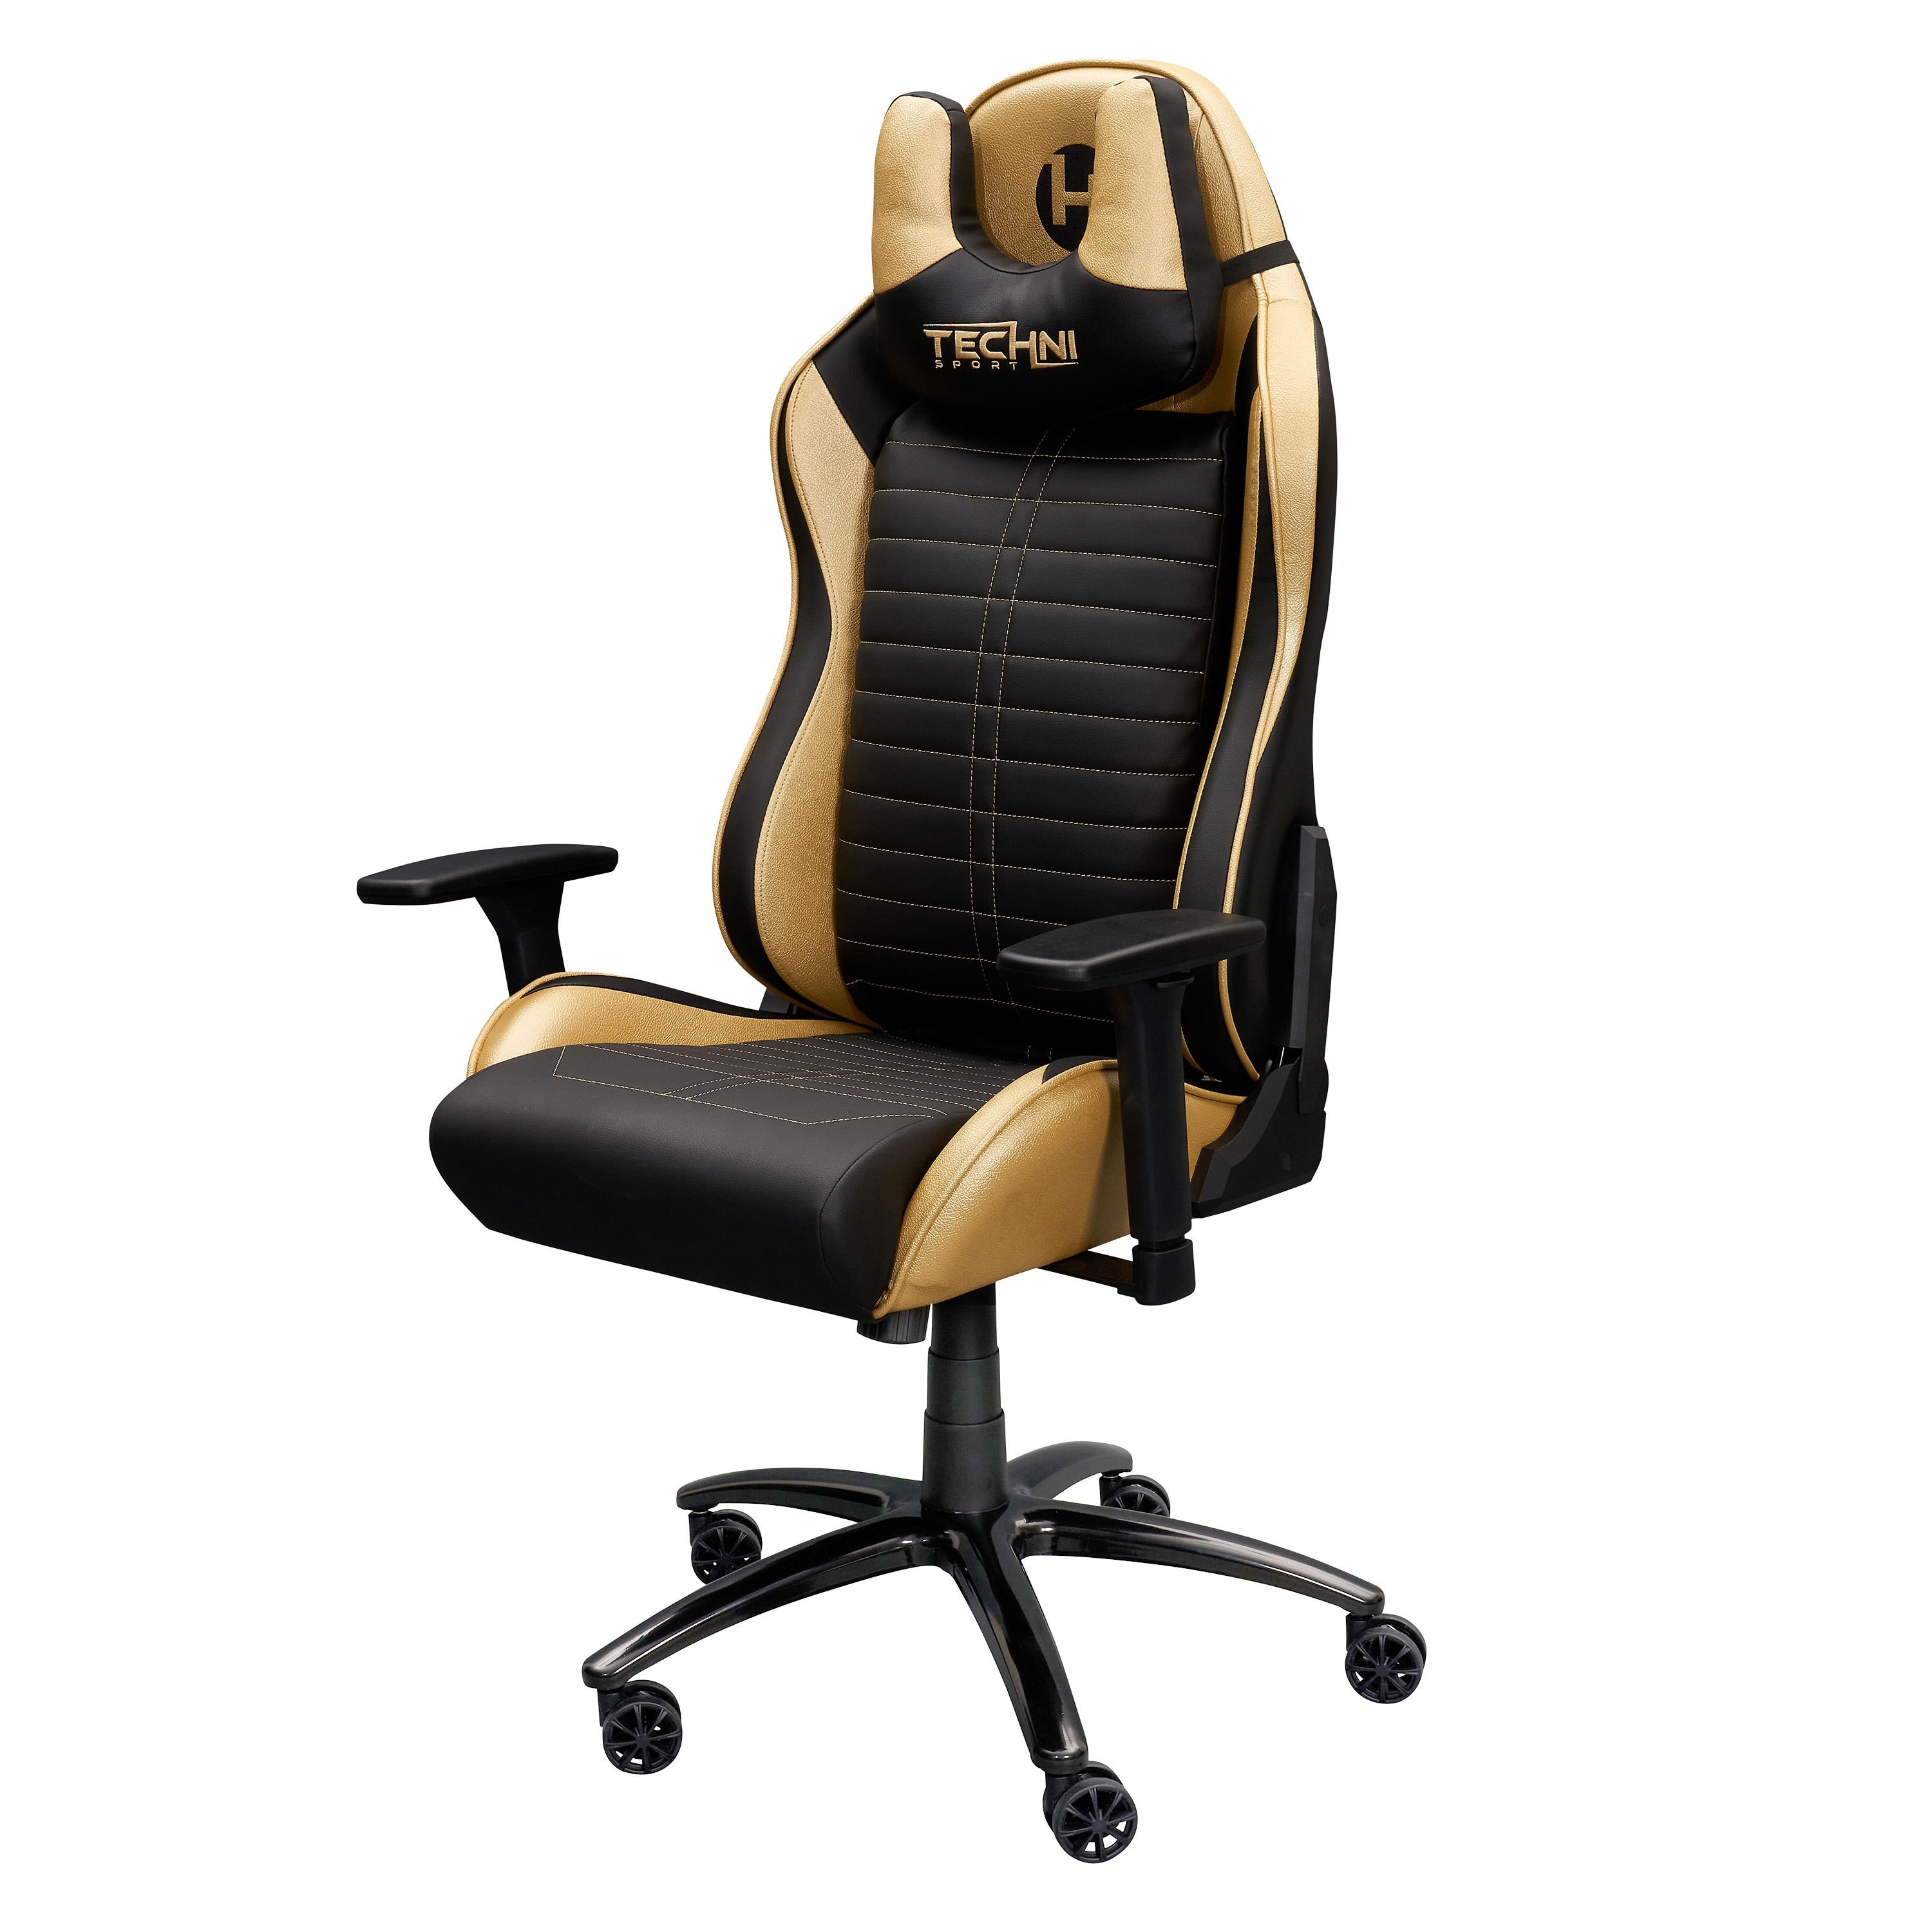 https://ak1.ostkcdn.com/images/products/is/images/direct/bb671e2189301d1456af26715e5696f490200f72/Ergonomic-Racing-Style-Gaming-Chair.jpg